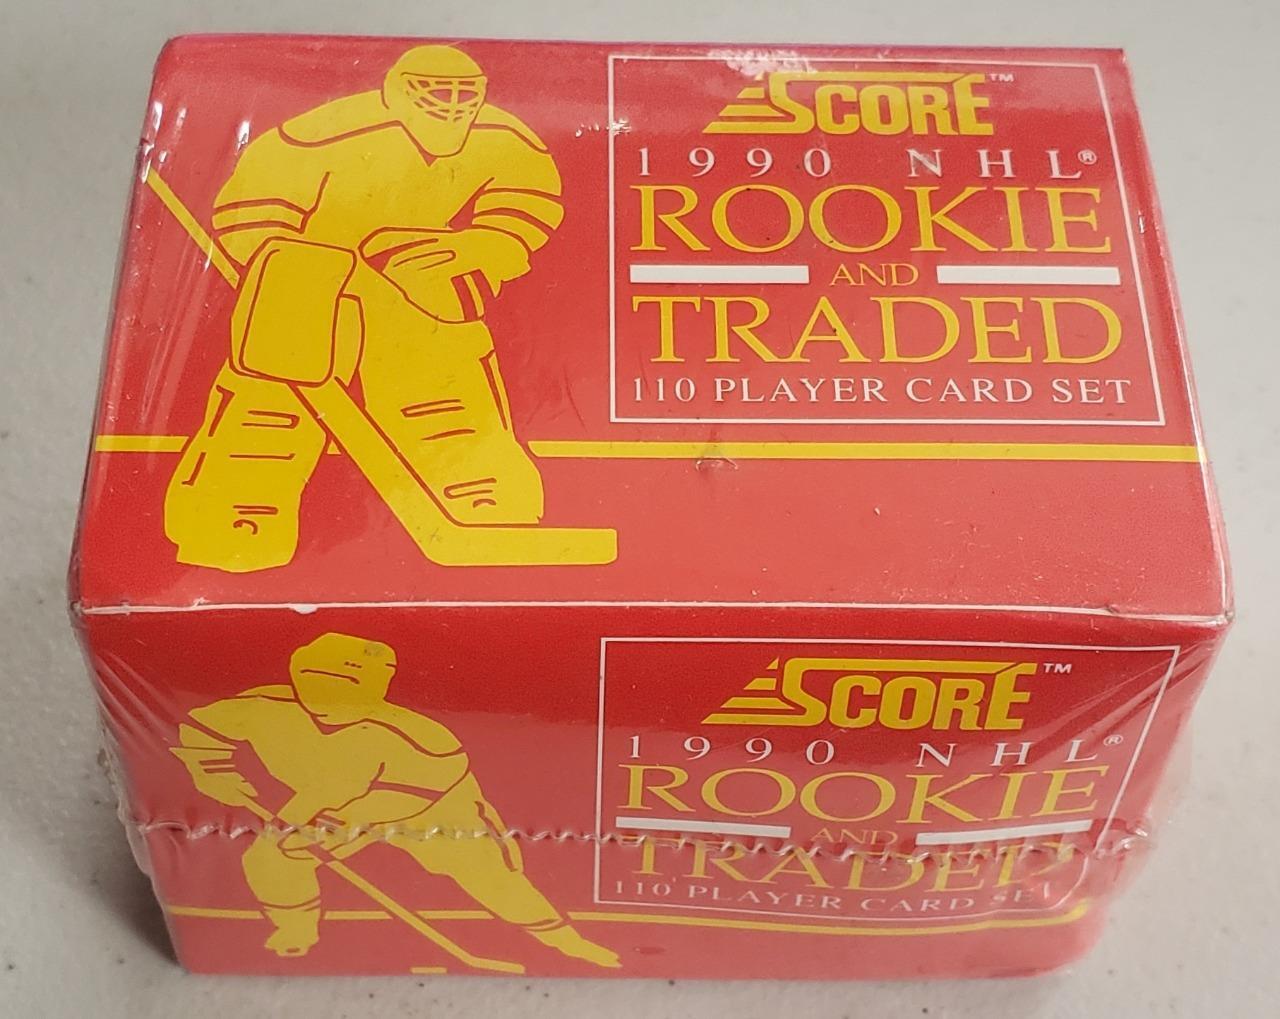 Score 1990 NHL Rookie and Traded 110 Player Card Set Sealed